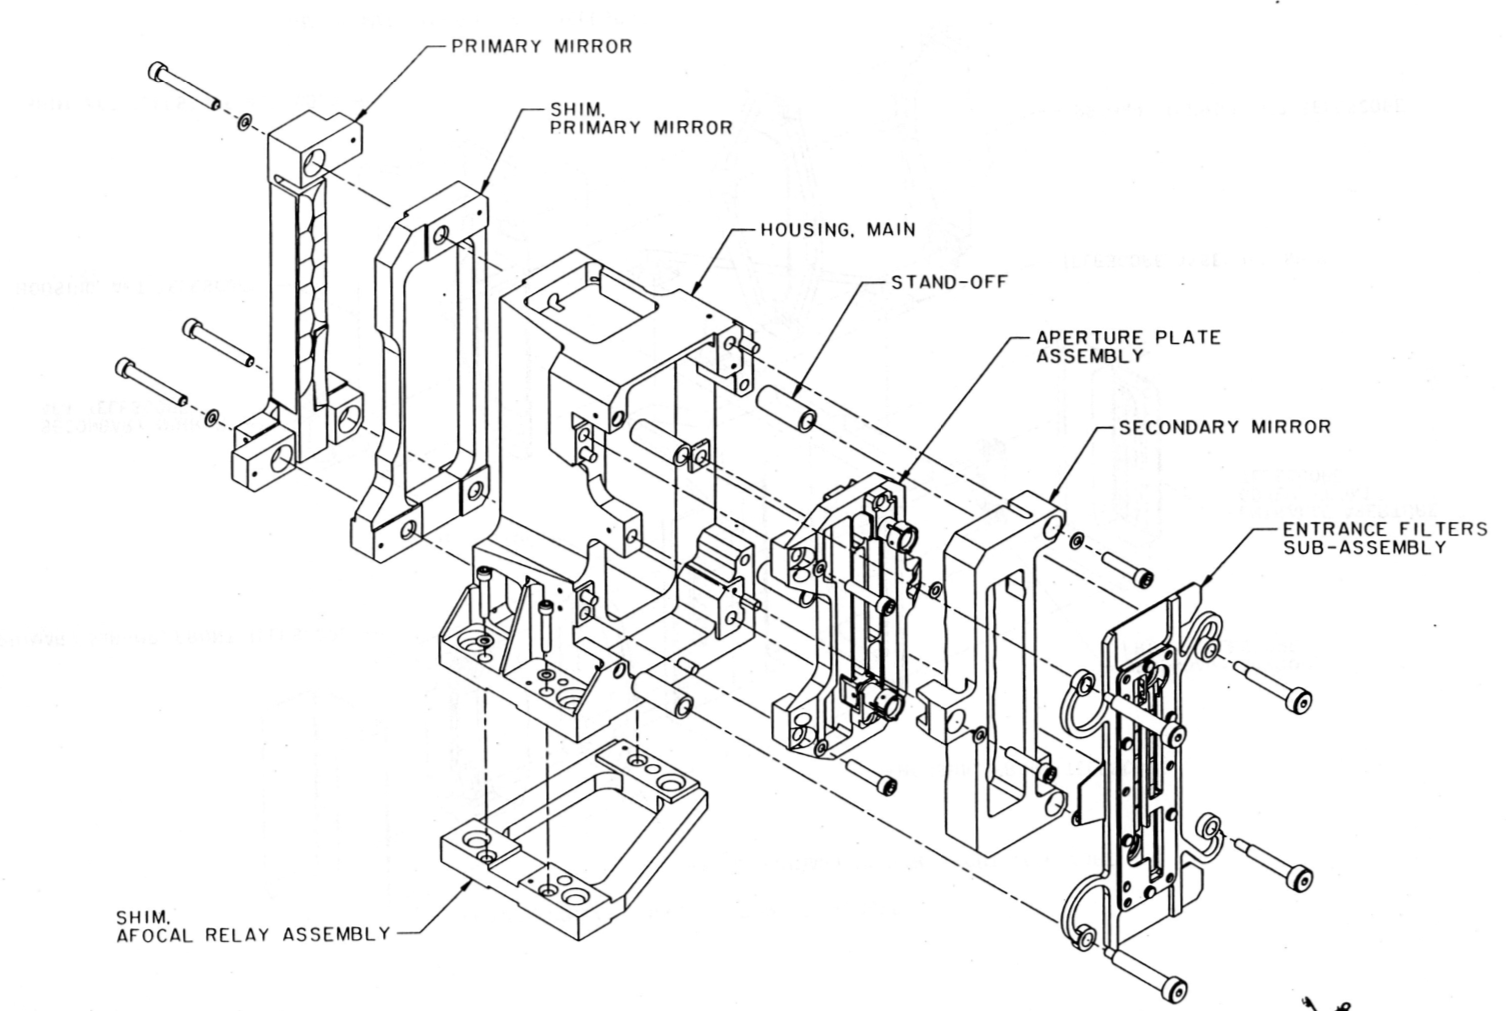 AIRS afocal relay exploded diagram